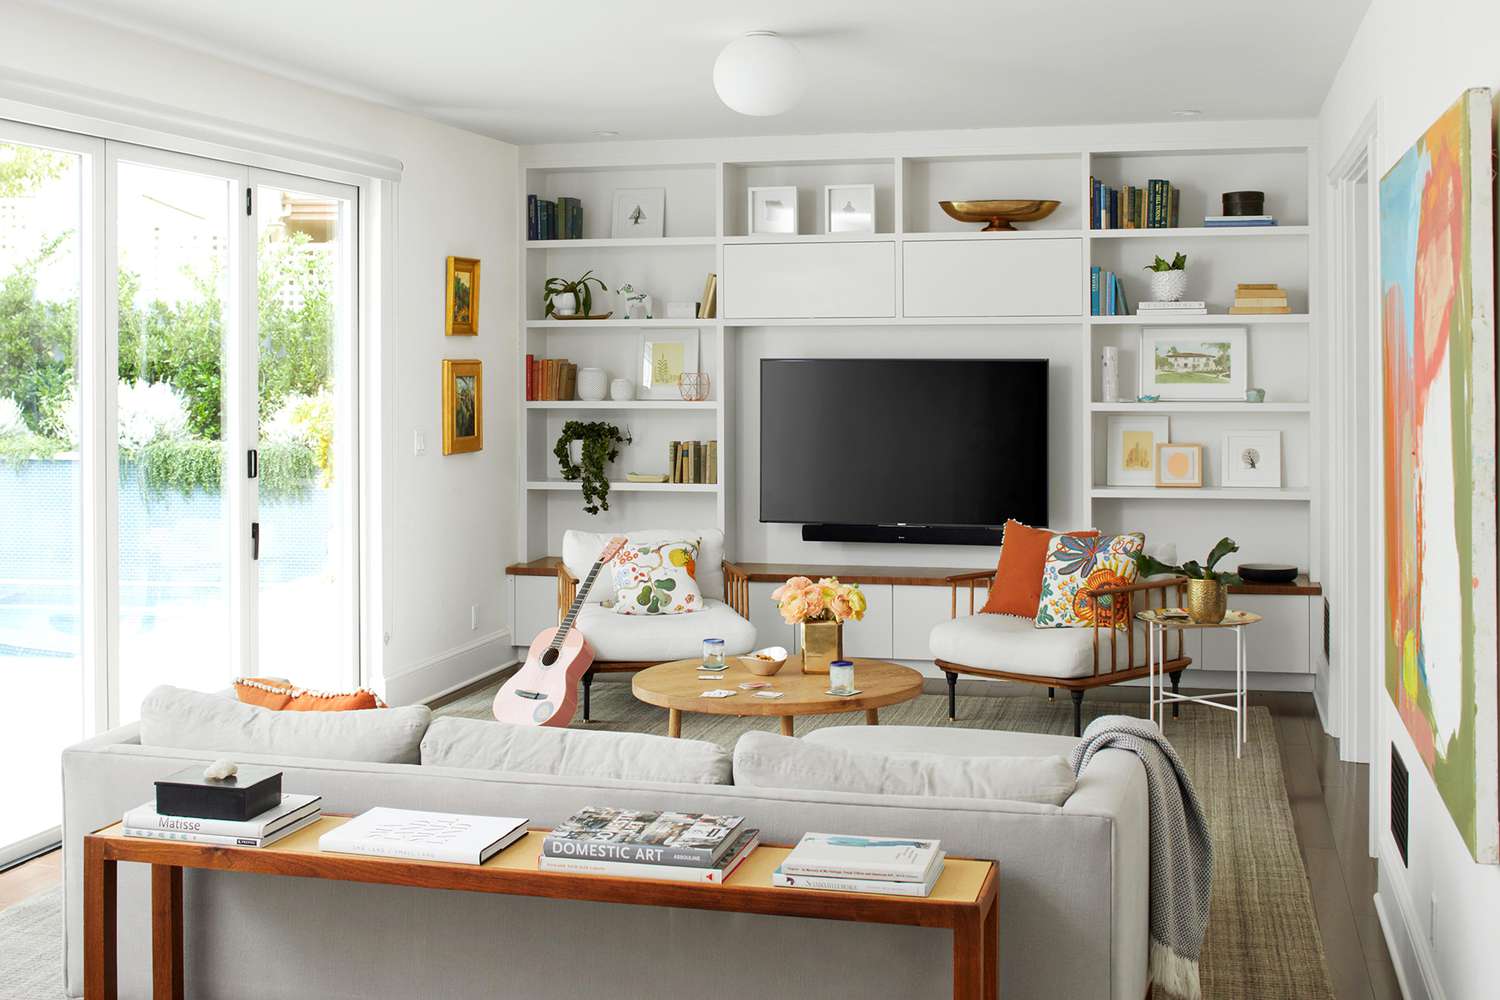 15 Stylish Ways to Decorate with a TV | Better Homes & Gardens